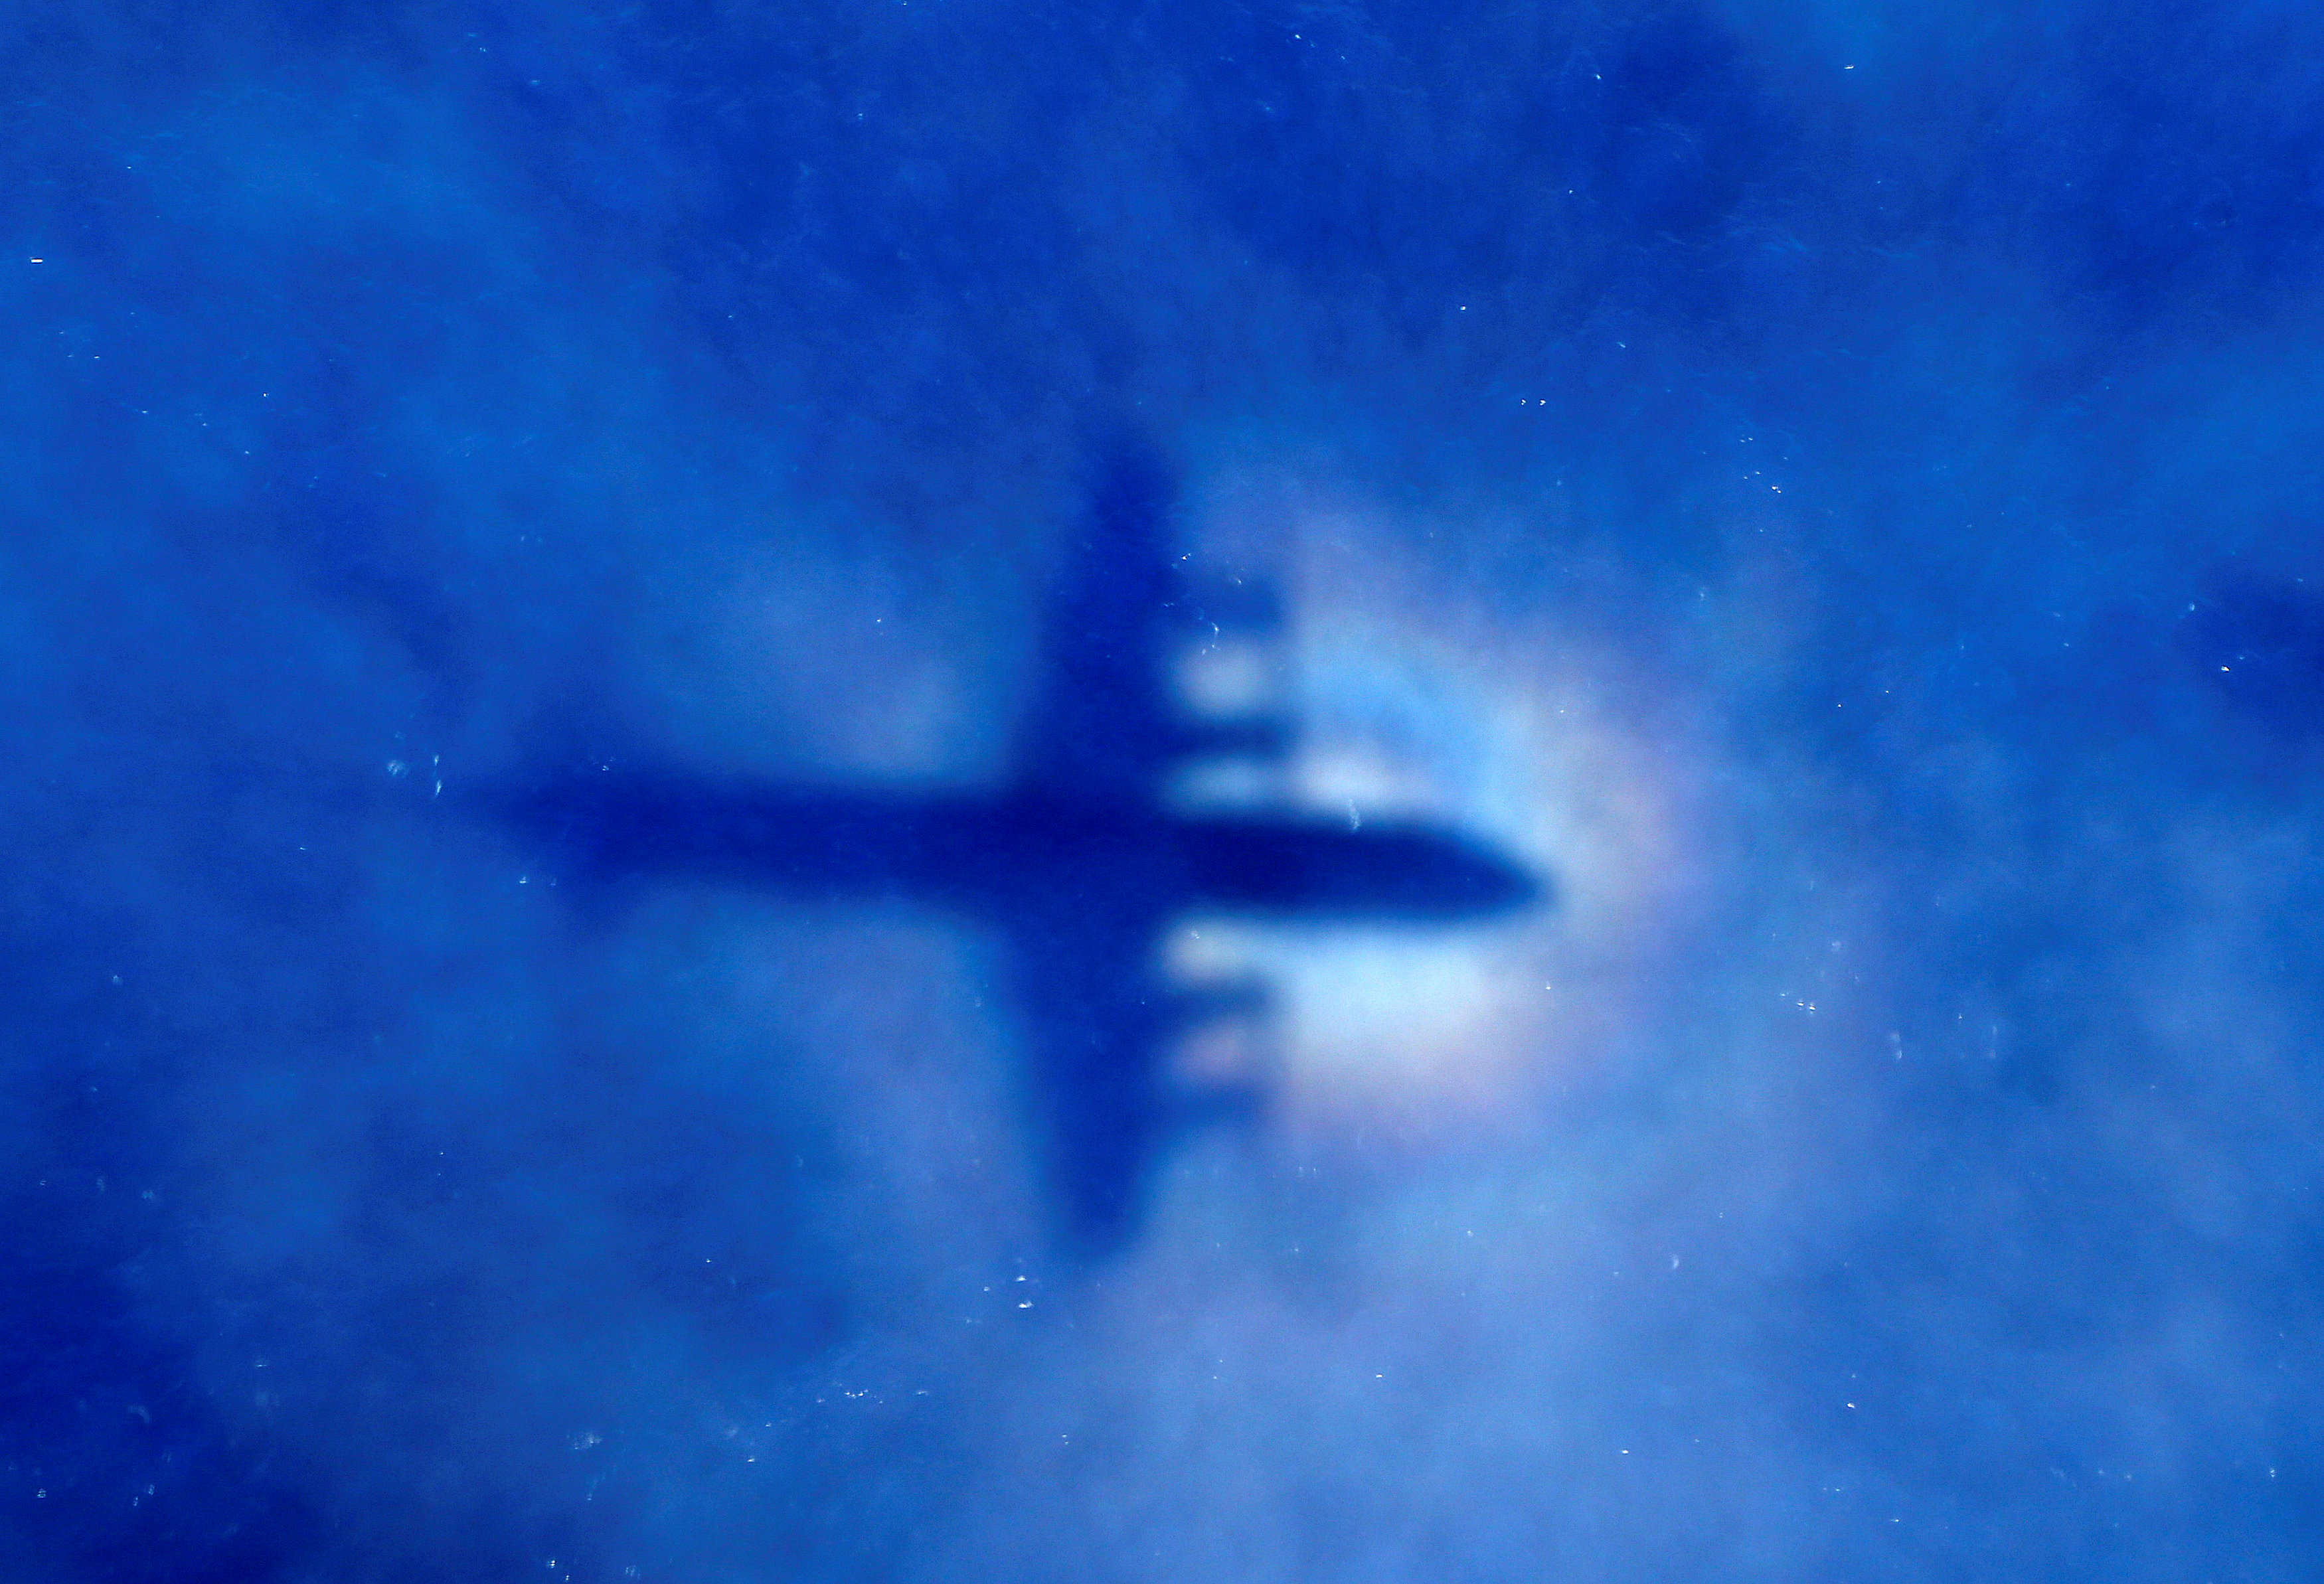 No decision yet on new offers to search for missing flight MH370, says Malaysia